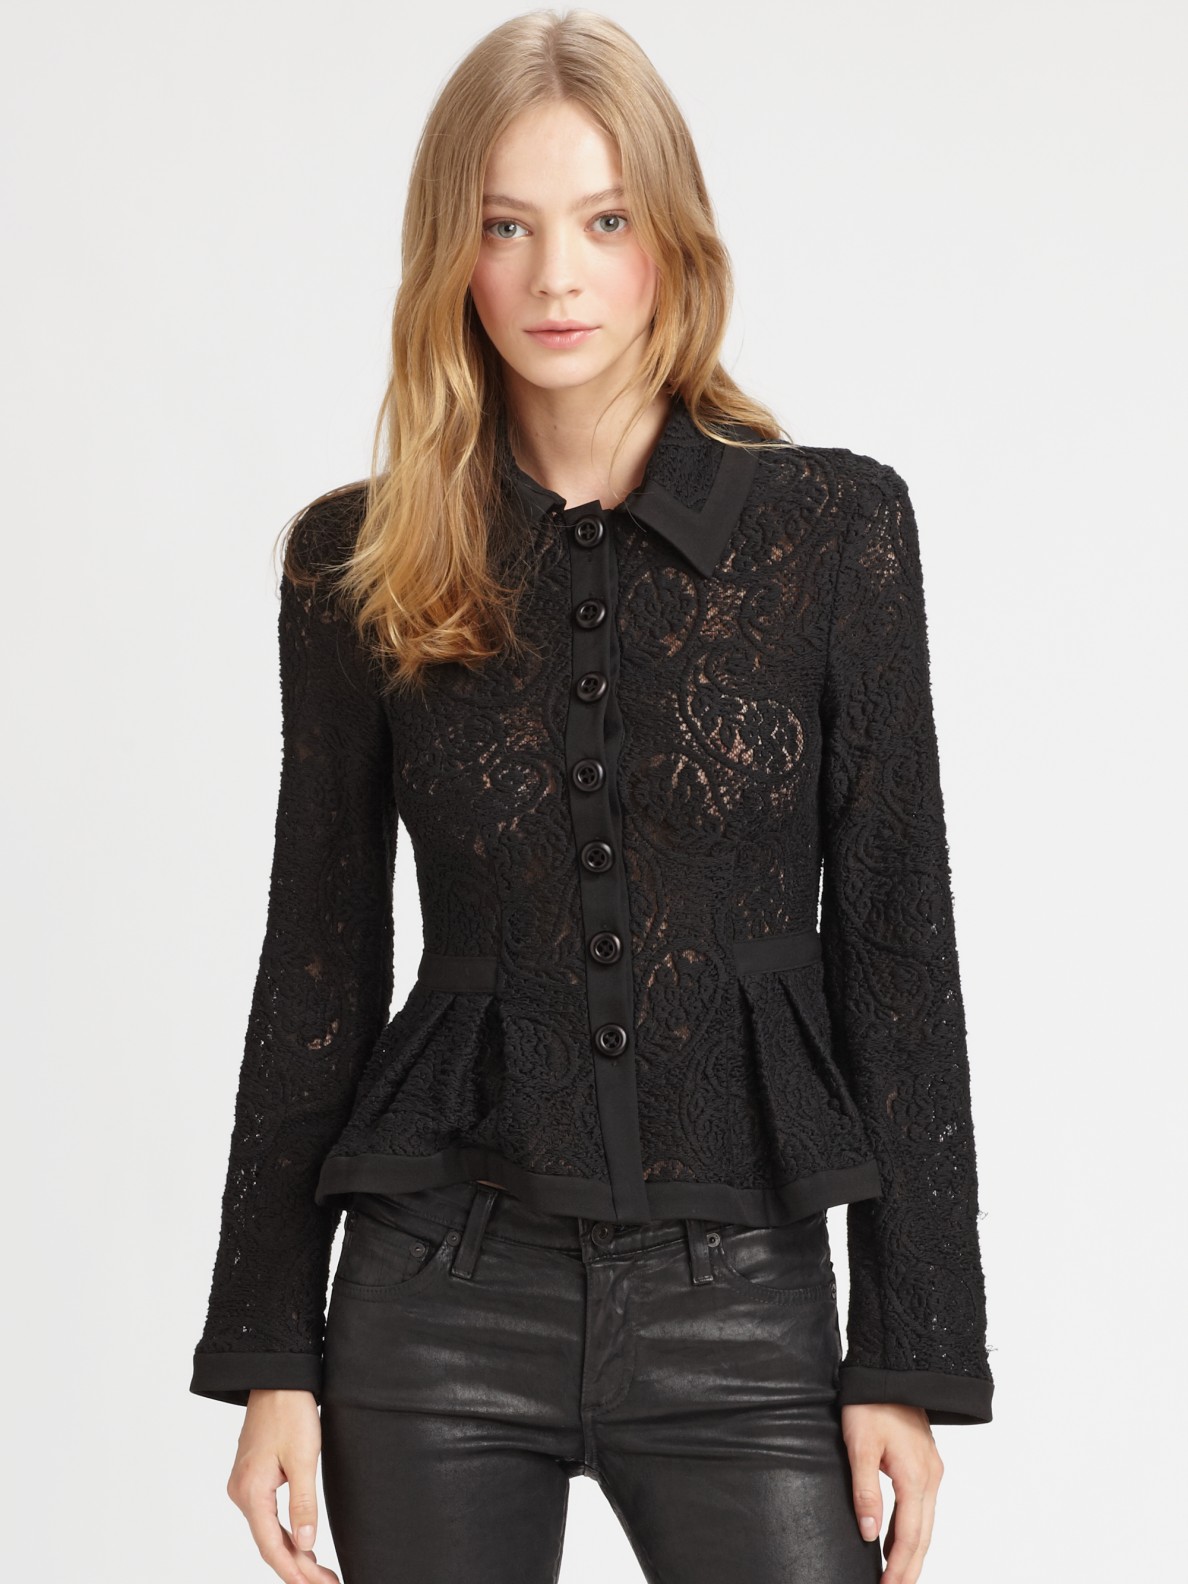 Lyst - Nanette Lepore Summer Flame Lace Peplum Jacket in Black